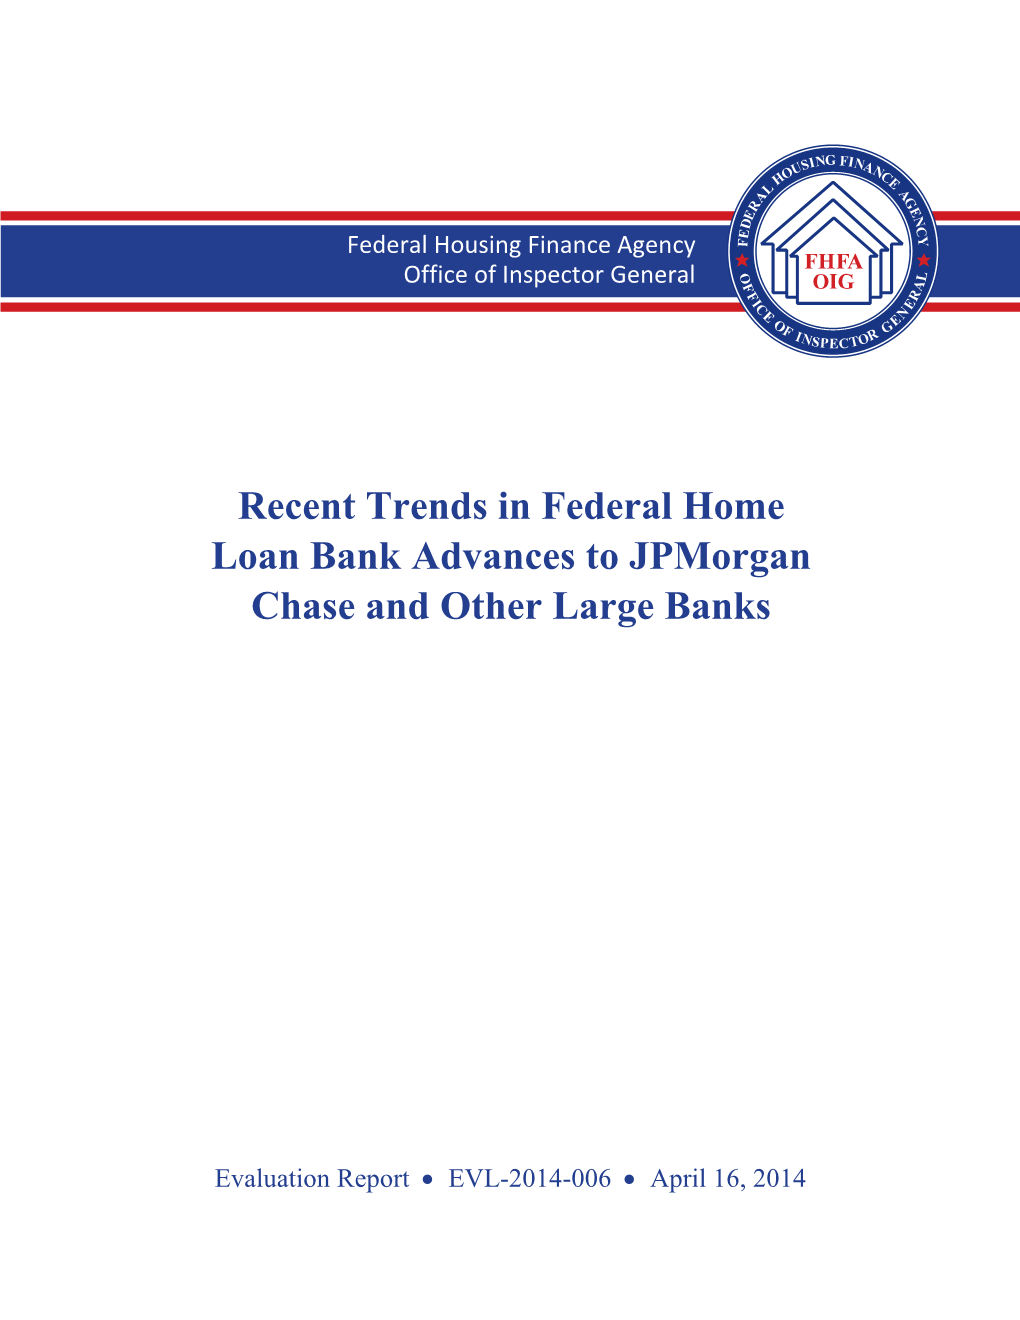 Recent Trends in Federal Home Loan Bank Advances to Jpmorgan Chase and Other Large Banks